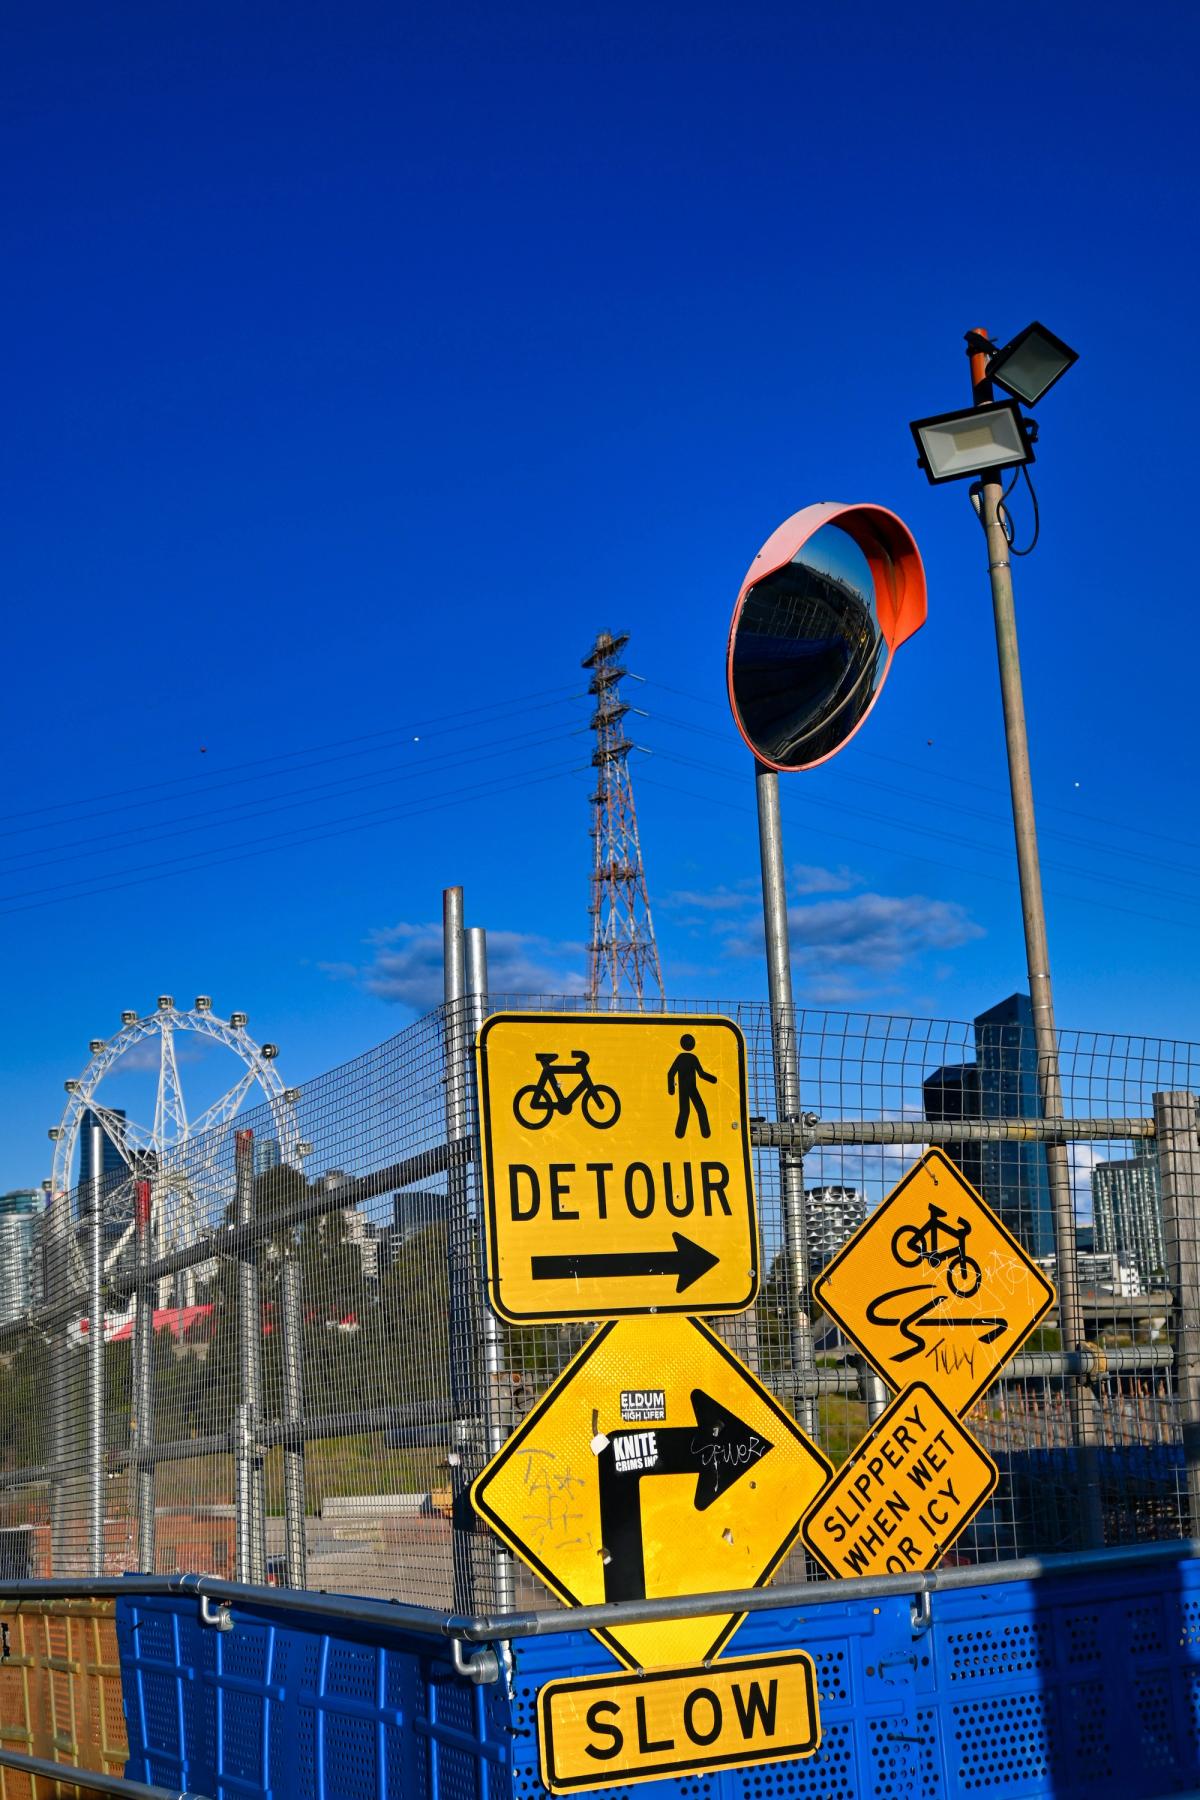 Detour signs in front of a fenced-in amusement park
Photo by Enguerrand Blanchy on Unsplash